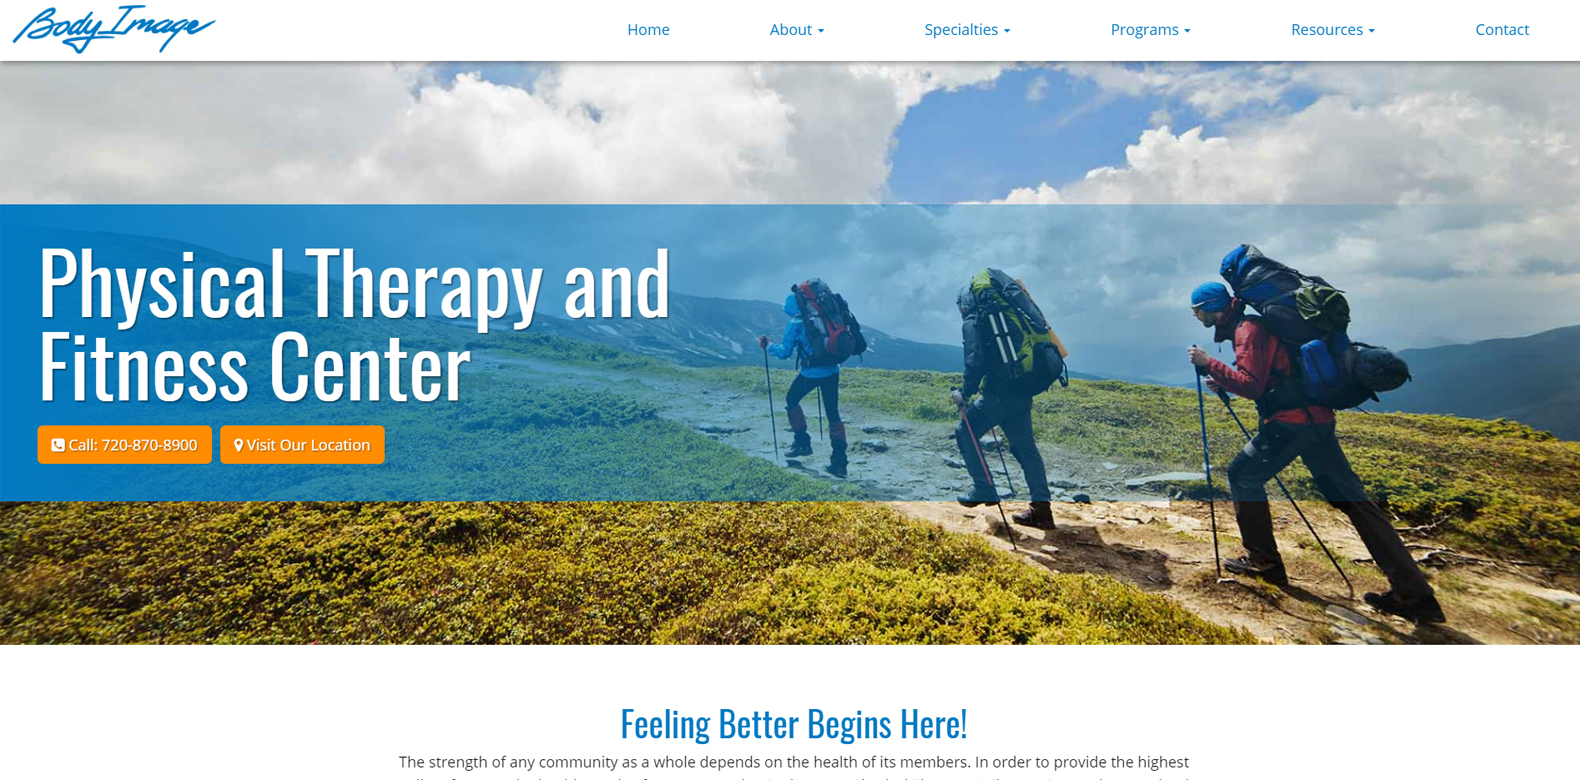 
New Website Launch: Body Image Physical Therapy